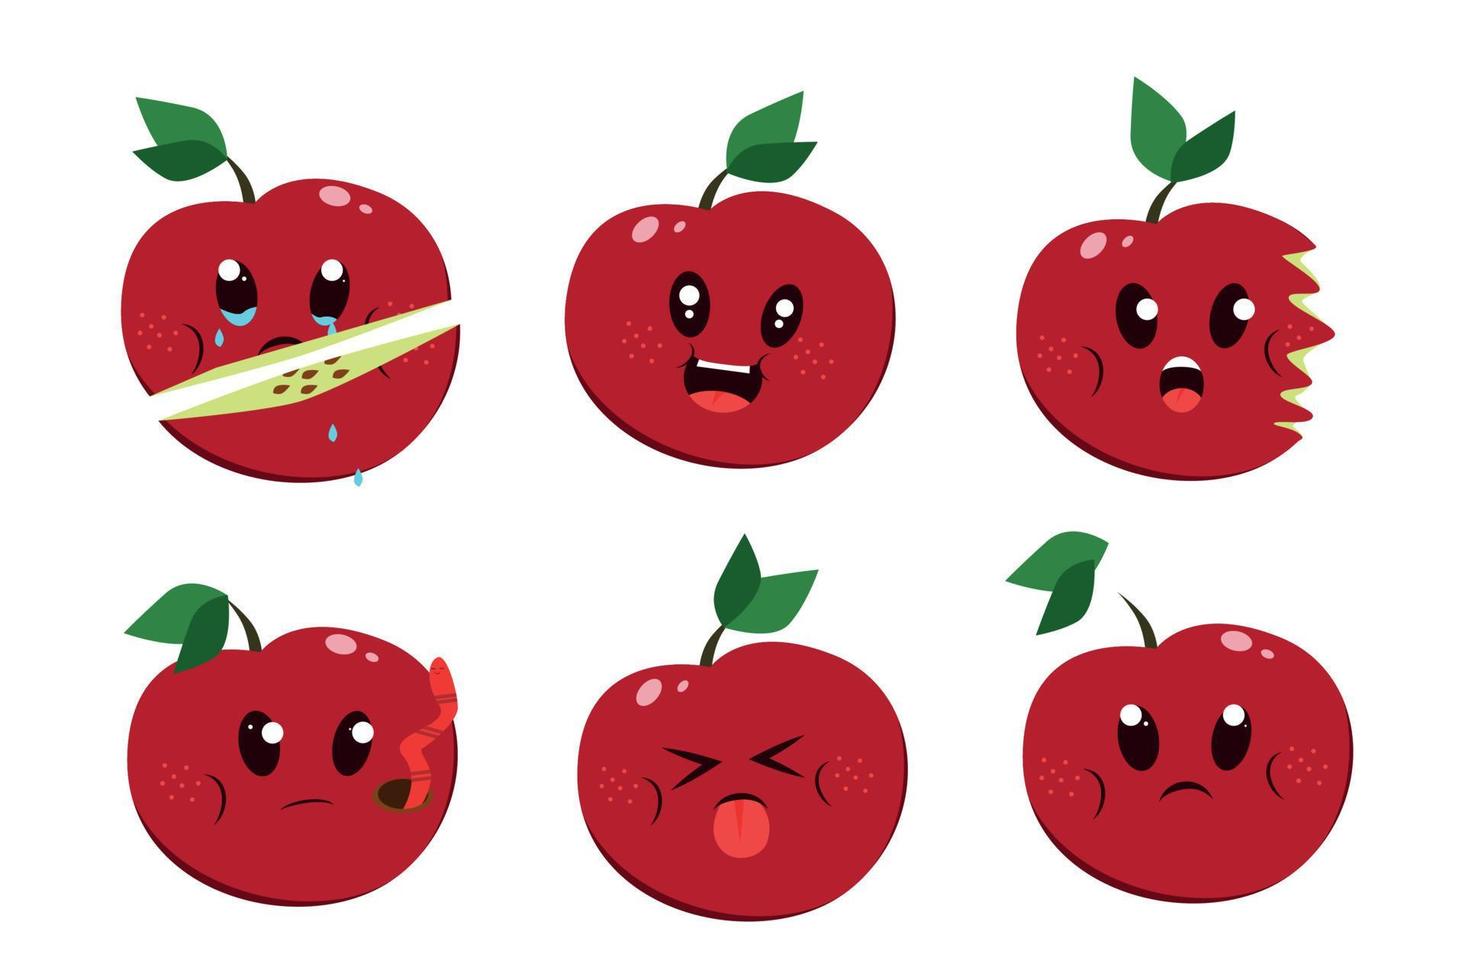 Red apple with kawaii eyes red apple emotion flat design vector illustration on a white background